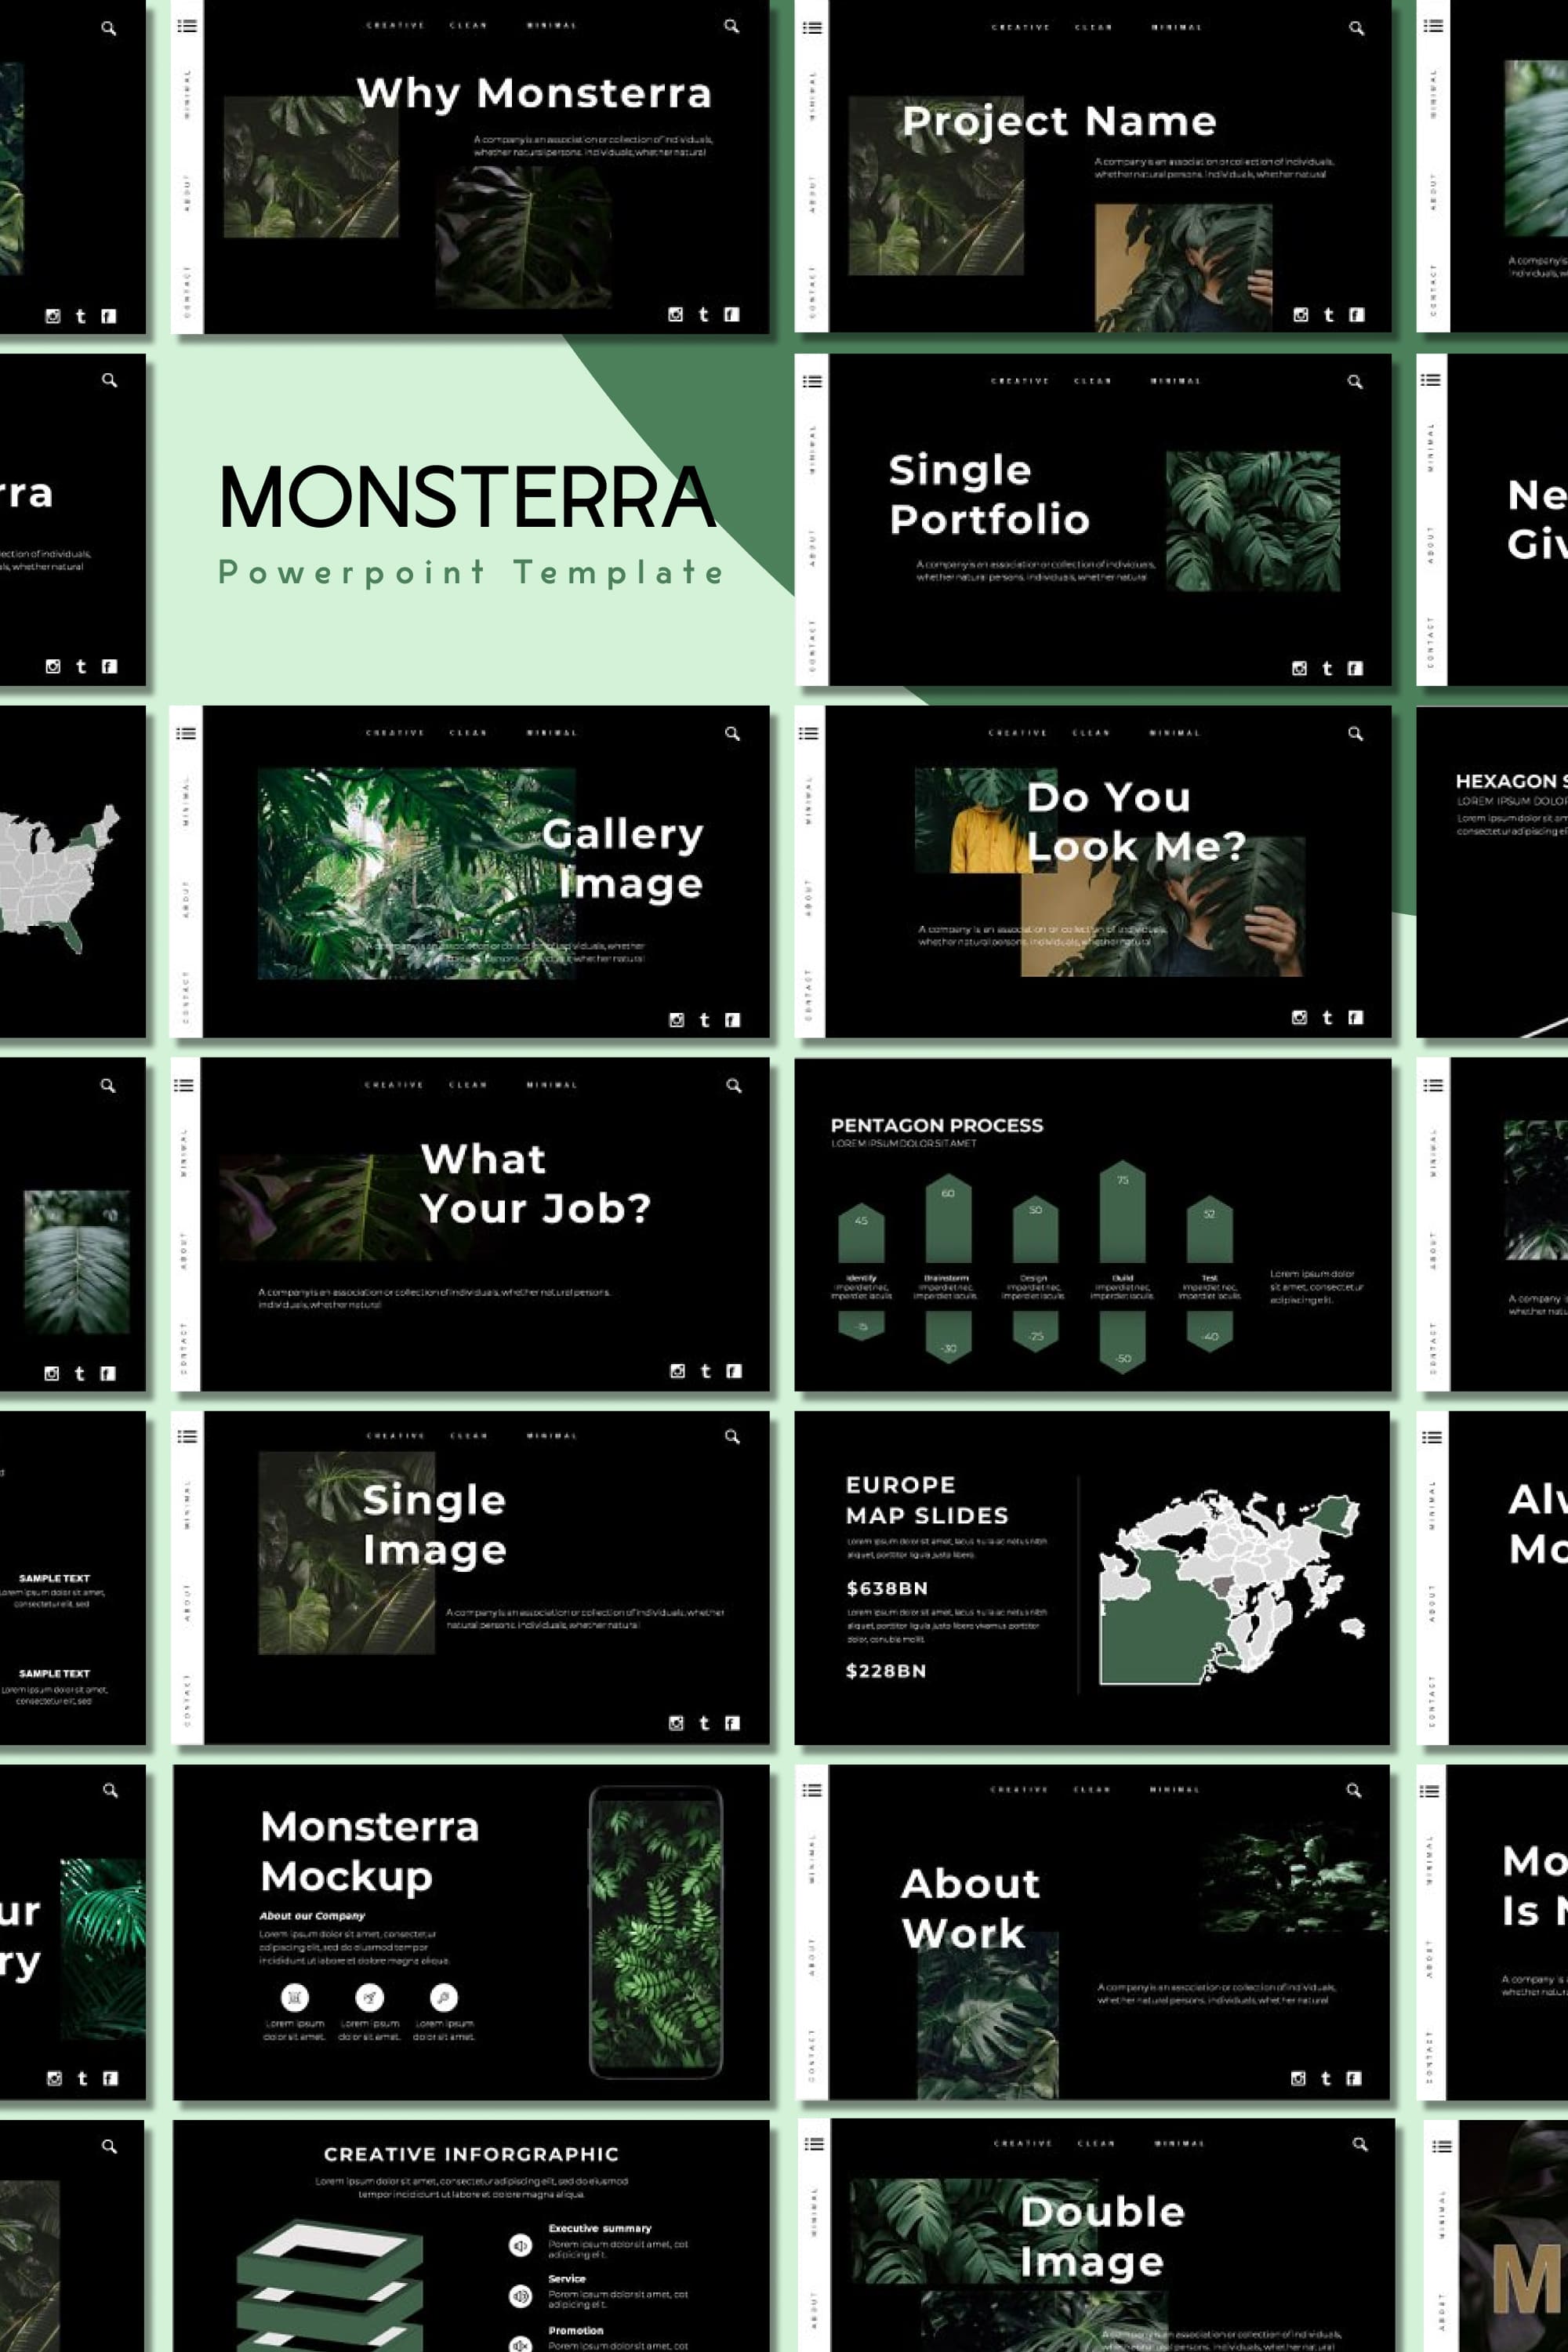 Monsterra powerpoint template - pinterest image preview.